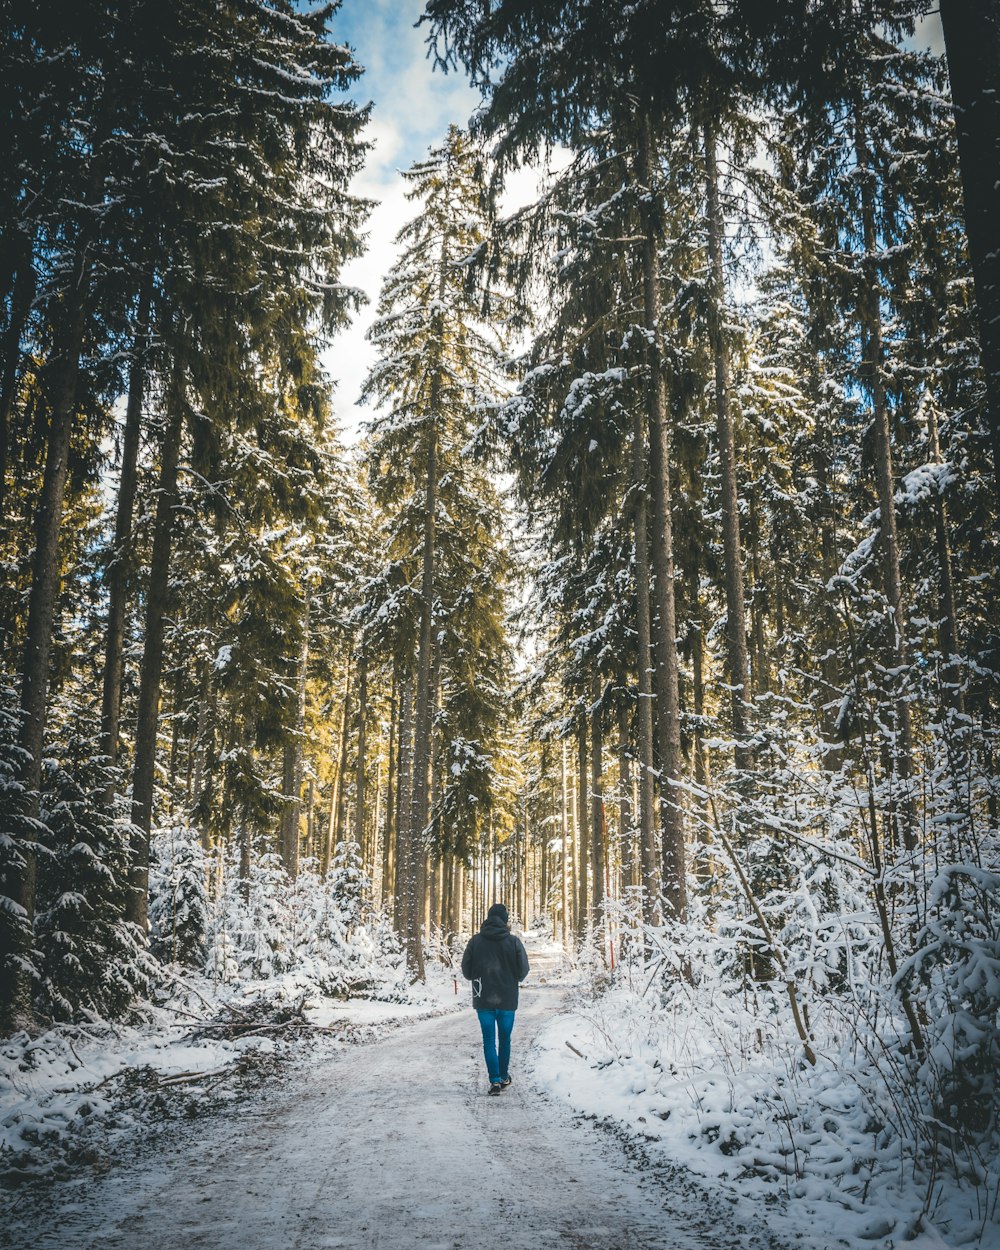 person in blue jacket and blue denim jeans walking on snow covered ground surrounded by trees